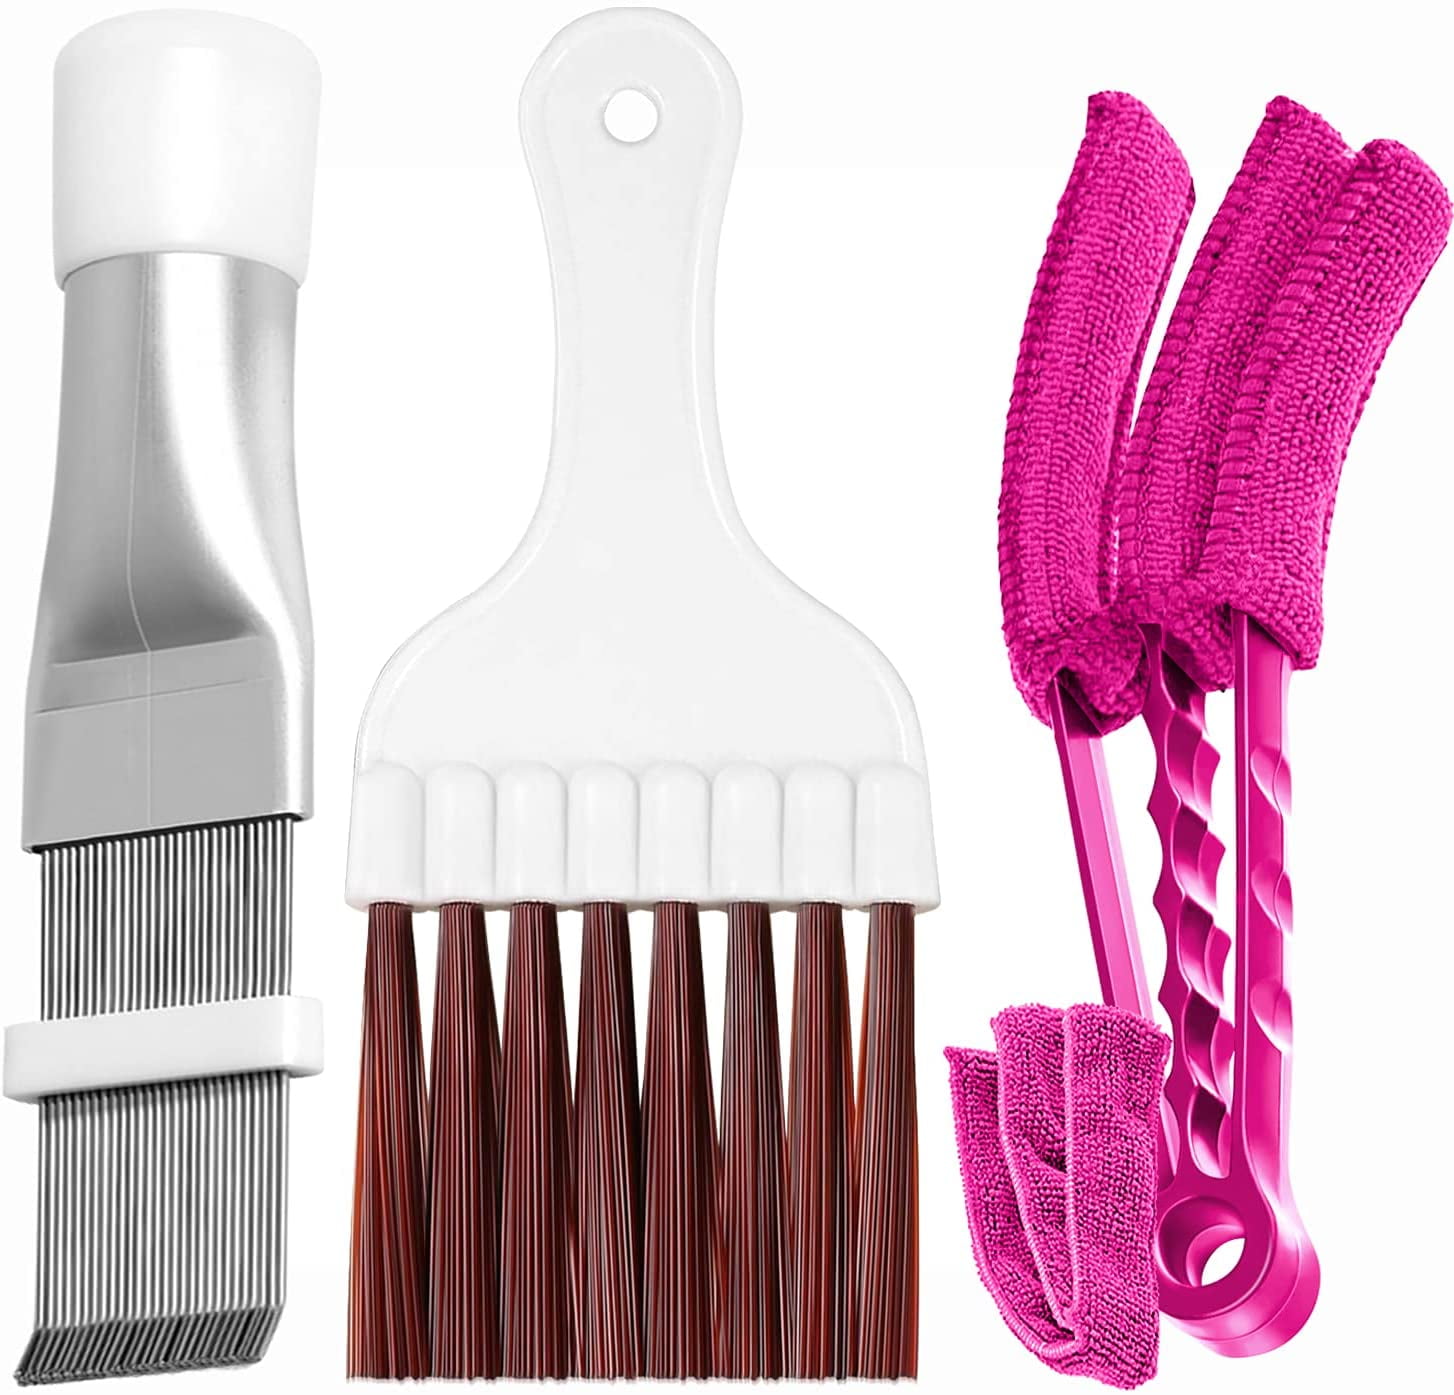 AC Coil Brush Fin Cleaner for Air Conditioner – Whisk Brush Fin